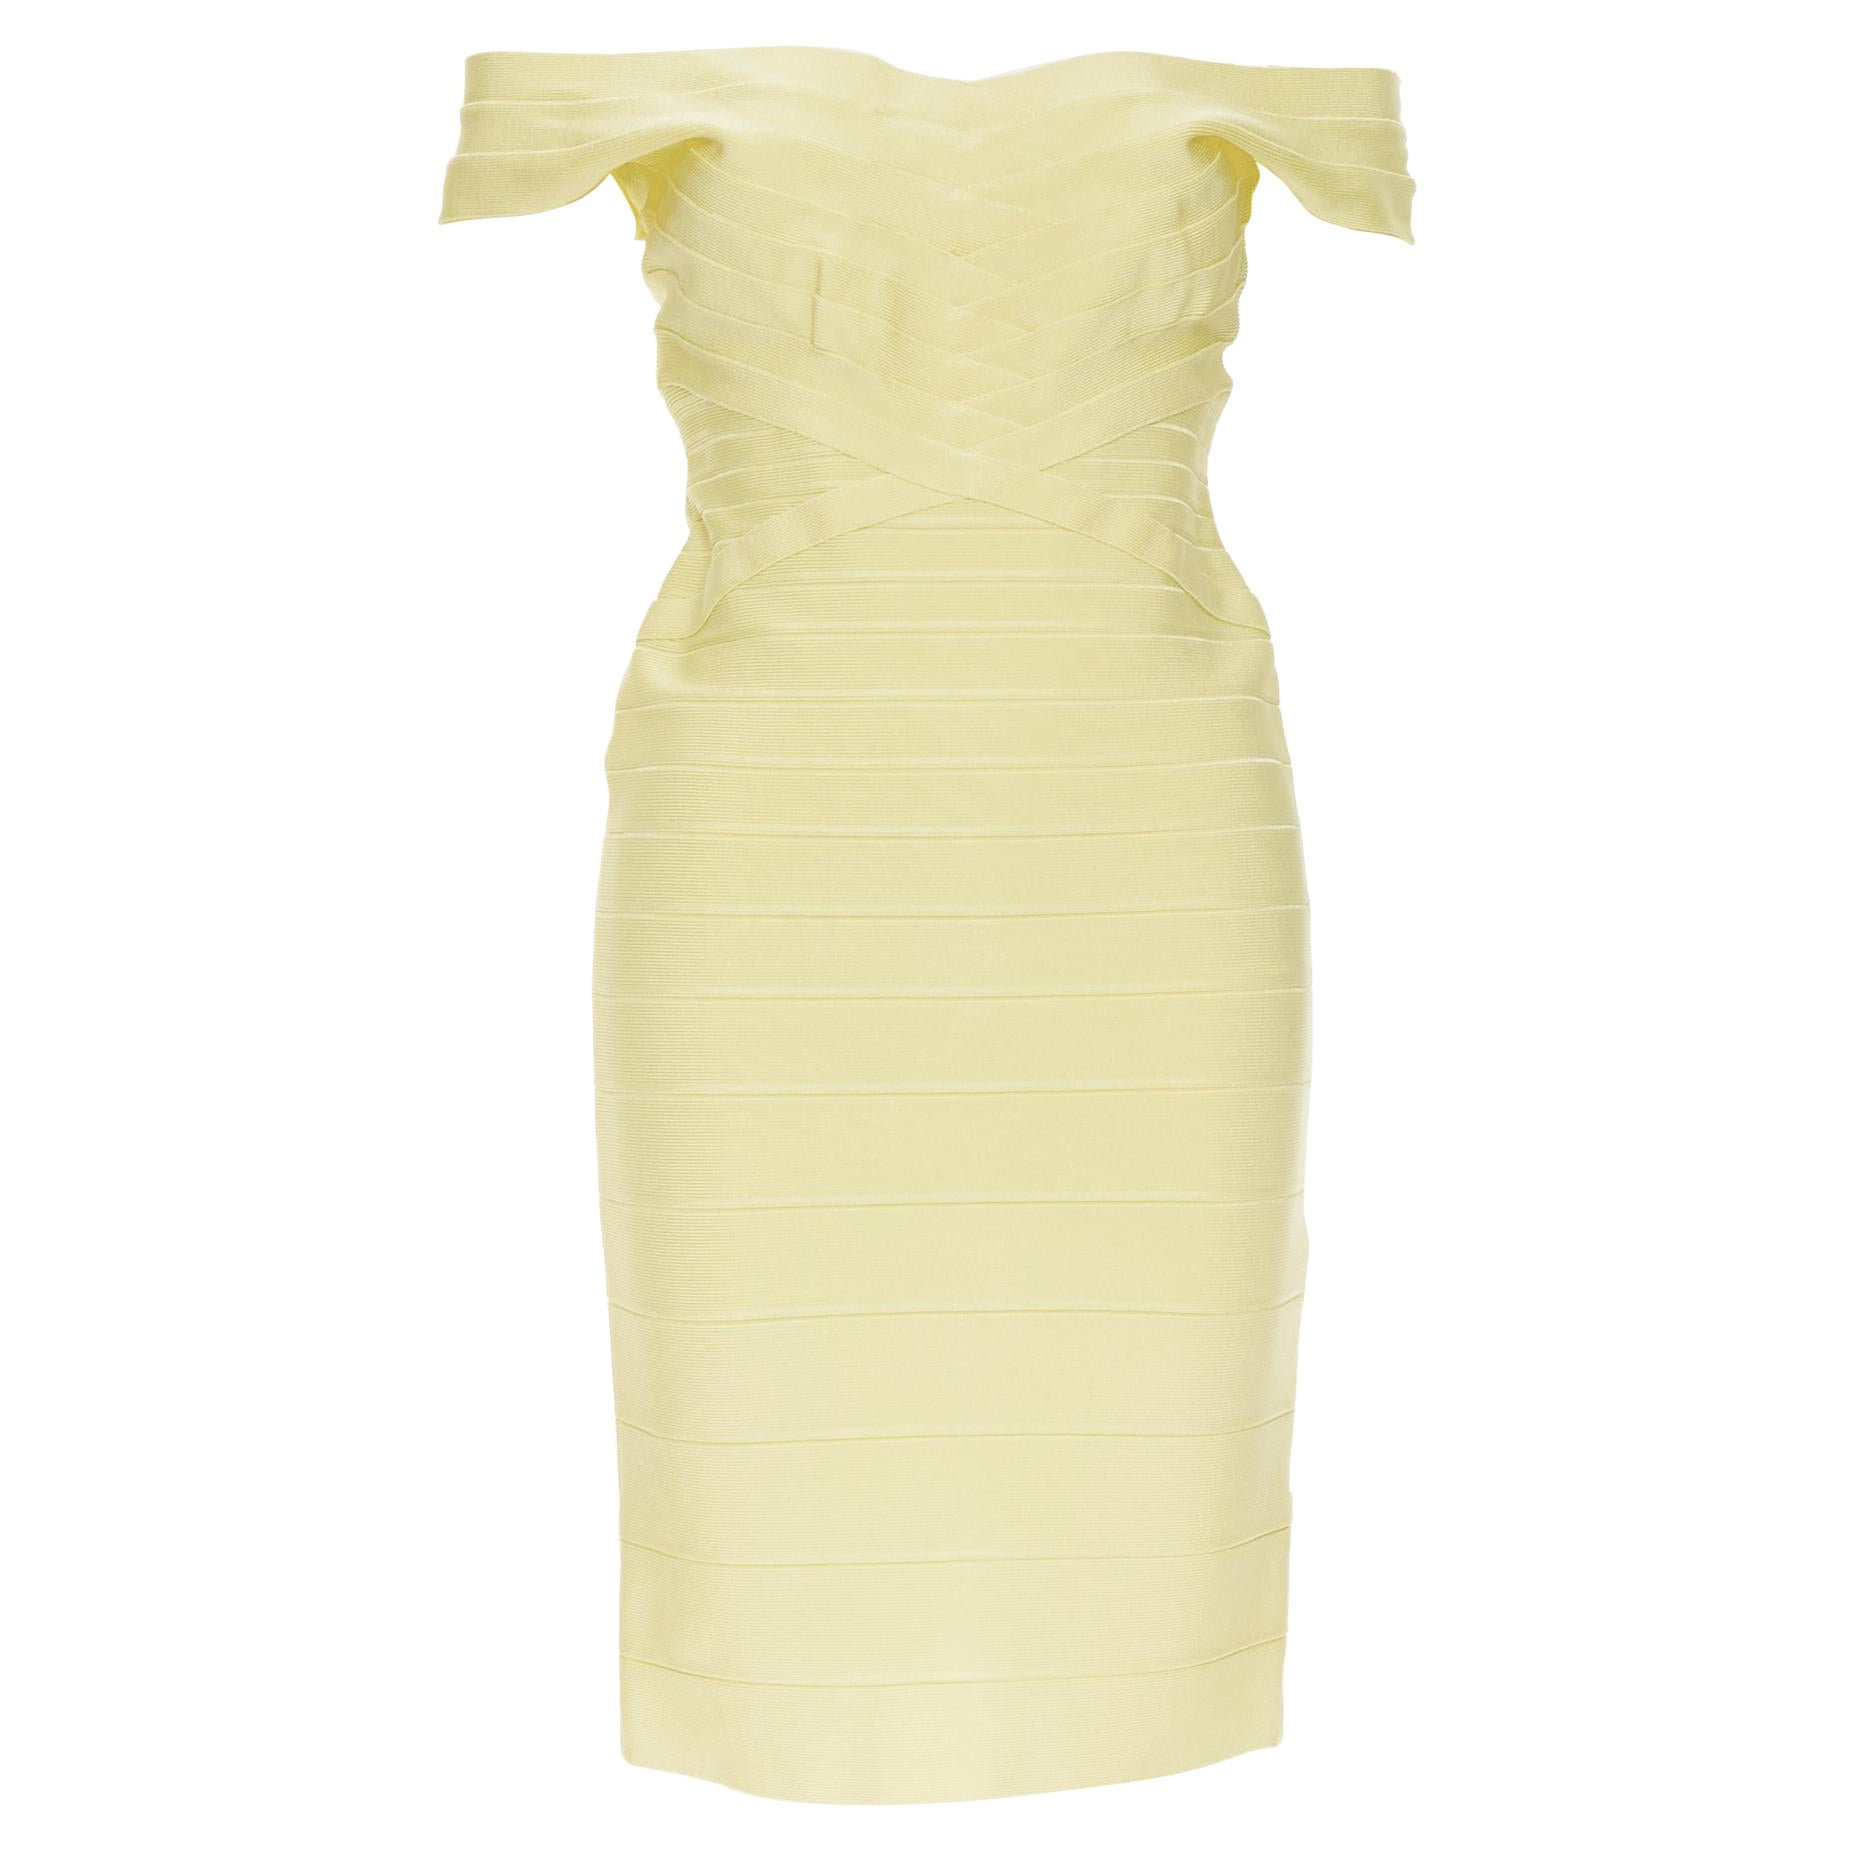 HERVE LEGER yellow off shoulder bodycon bandage fitted dress M